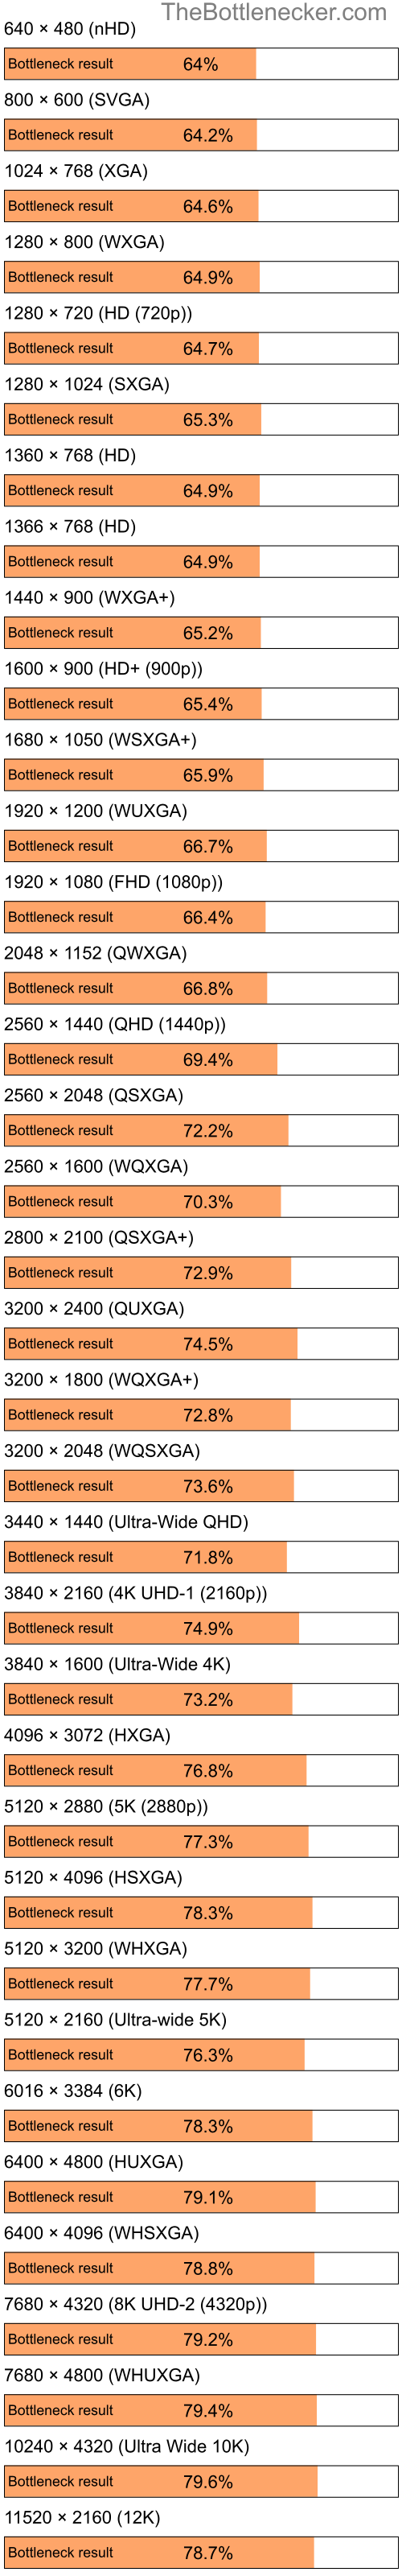 Bottleneck results by resolution for Intel Pentium 4 and AMD Mobility Radeon HD 3450 in General Tasks